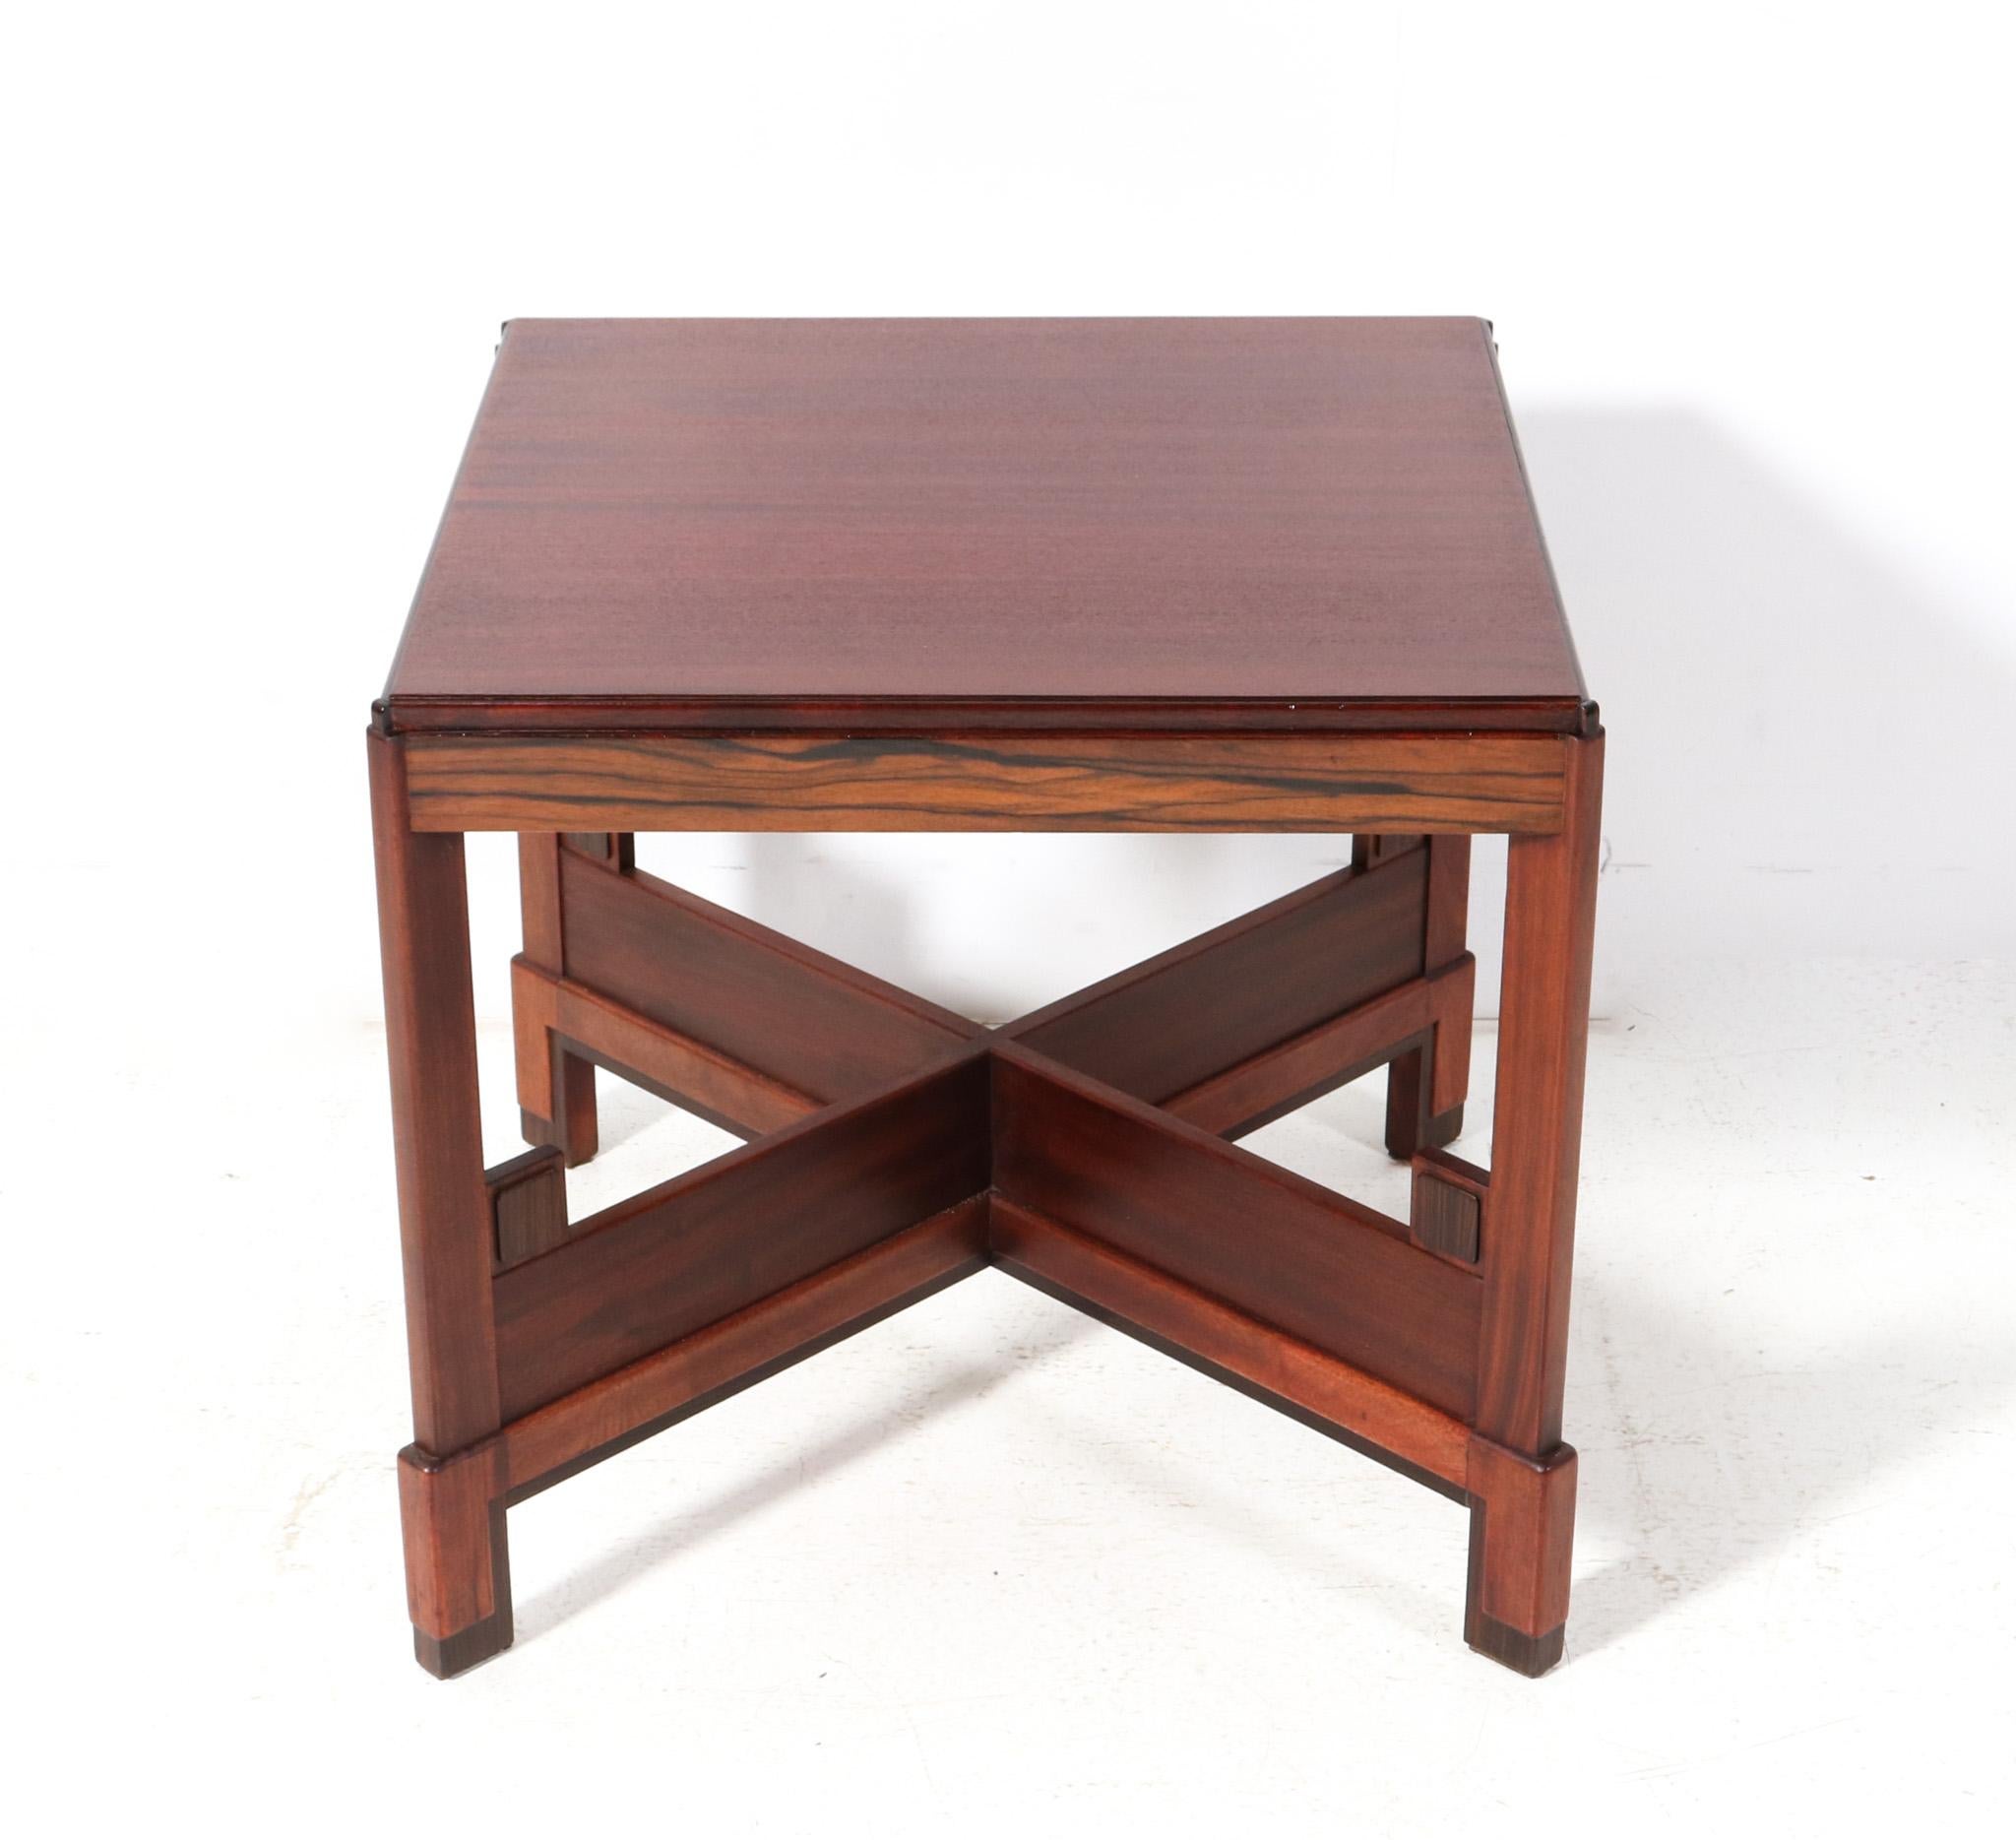 Mid-20th Century Walnut Art Deco Modernist Coffee table or Cocktail table, 1920s For Sale